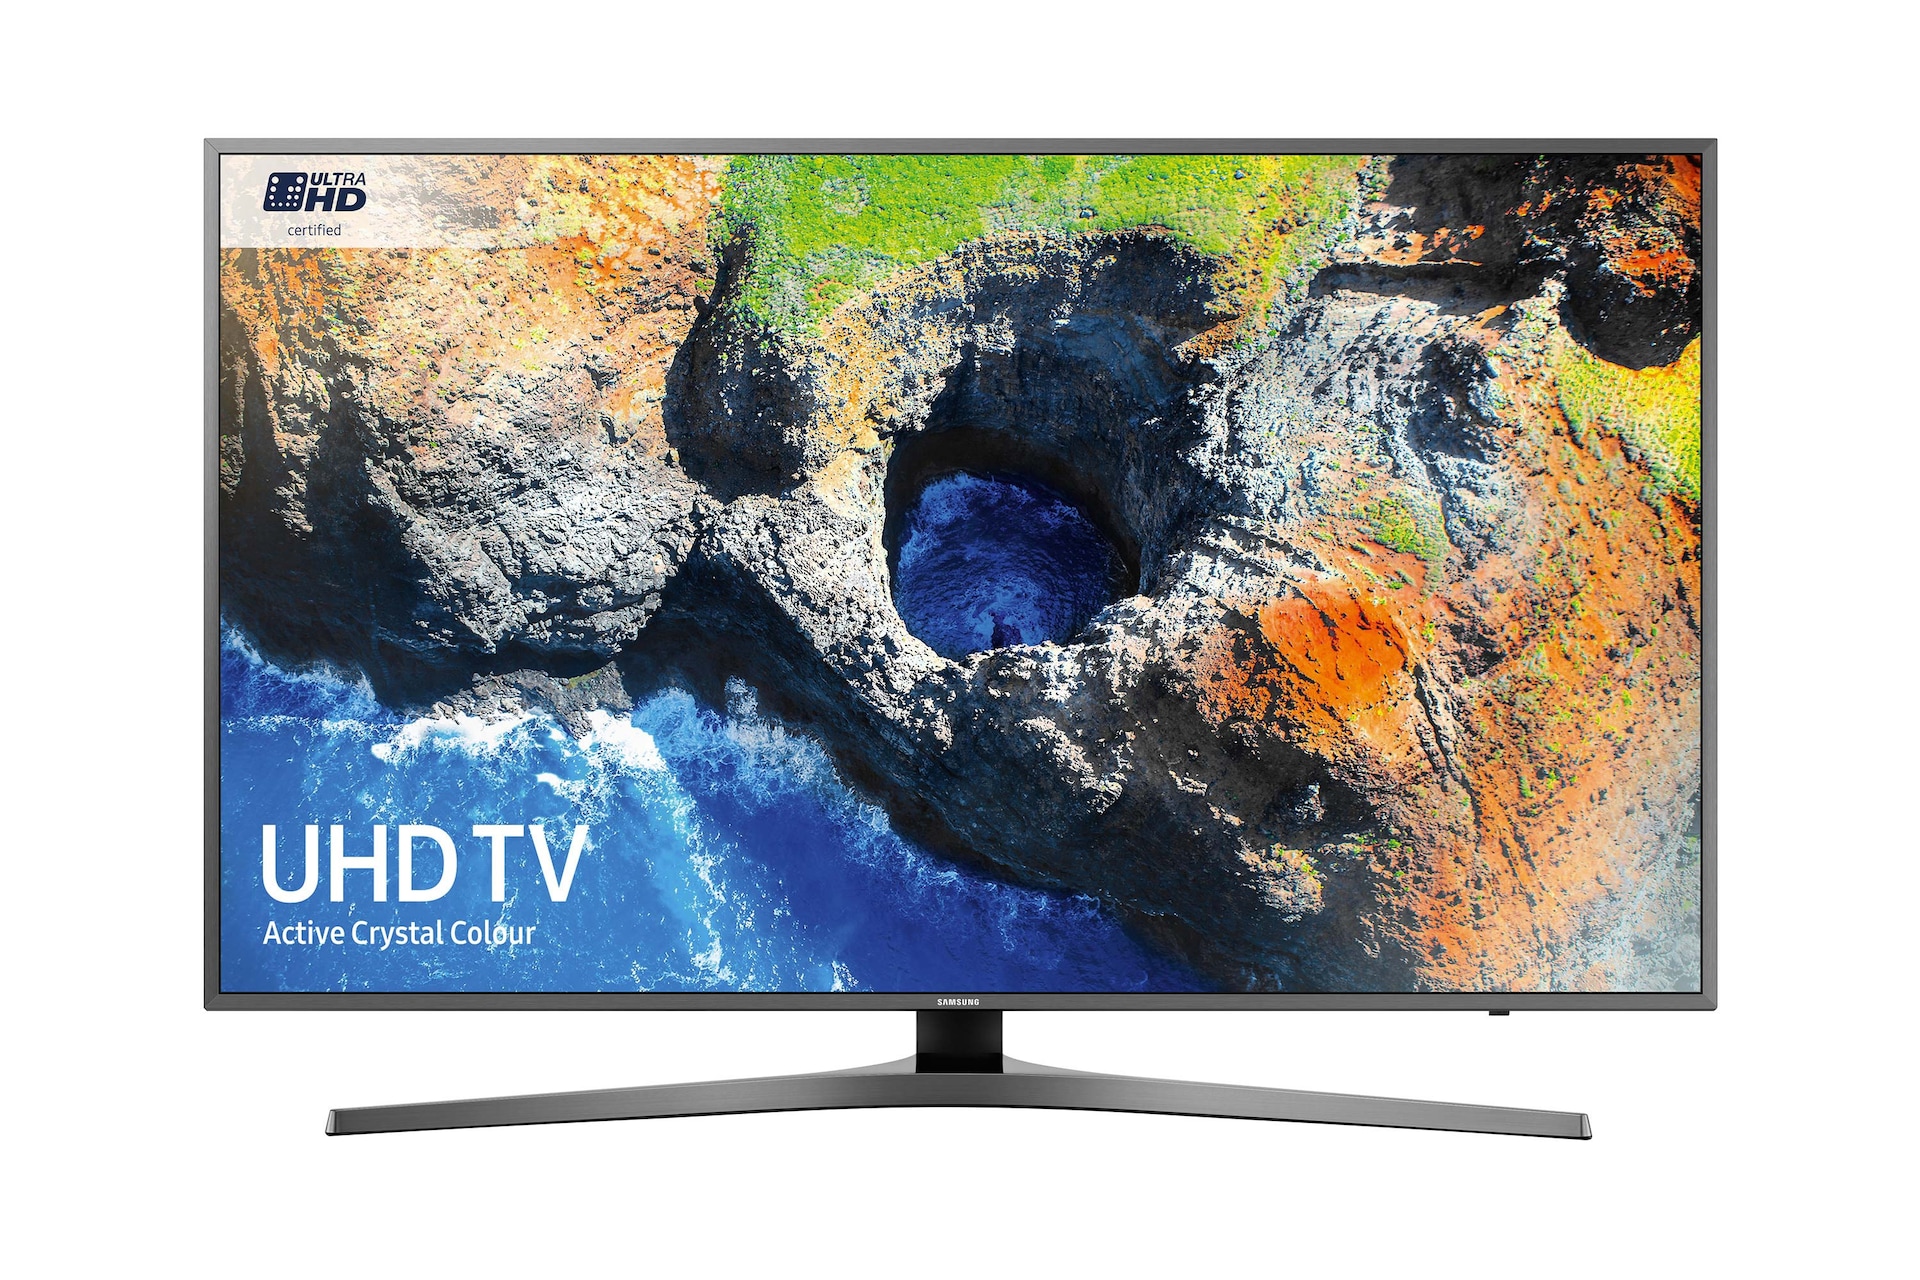 40" MU6470 Active Crystal Colour Ultra HDR Smart TV | Samsung Support